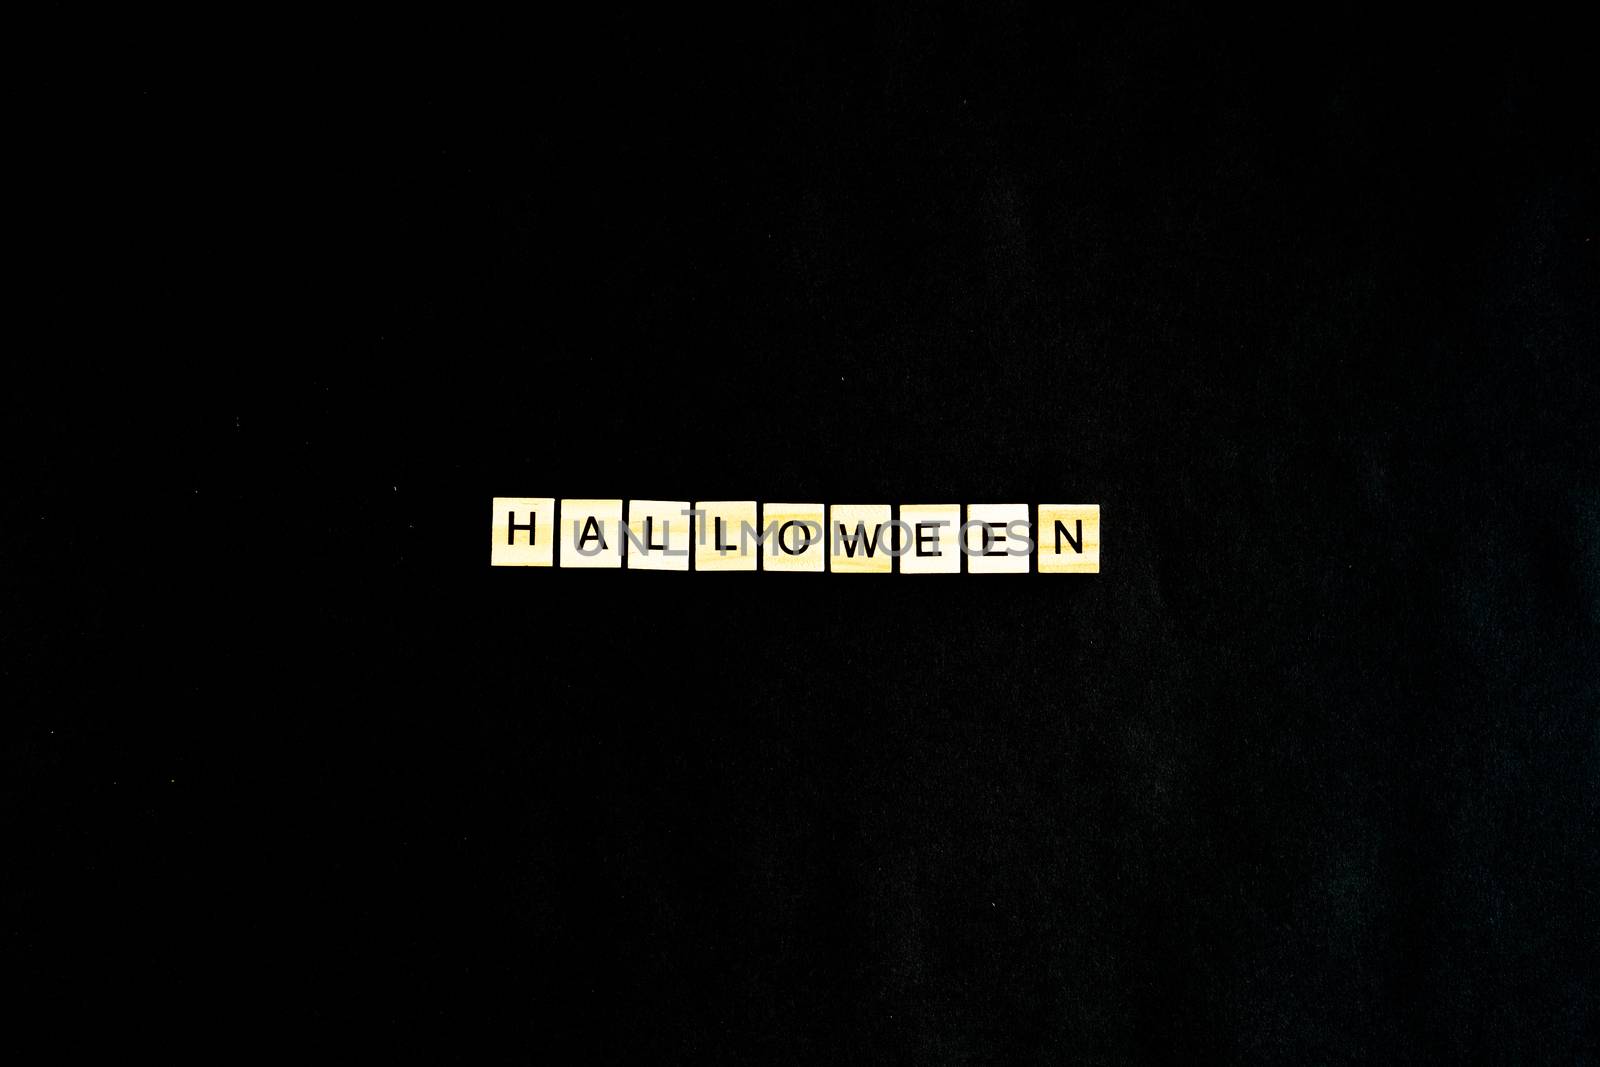 Words Halloween. Wooden blocks with lettering on black background decorated with pumpkins. Top view, flat lay. Happy Halloween by Pirlik